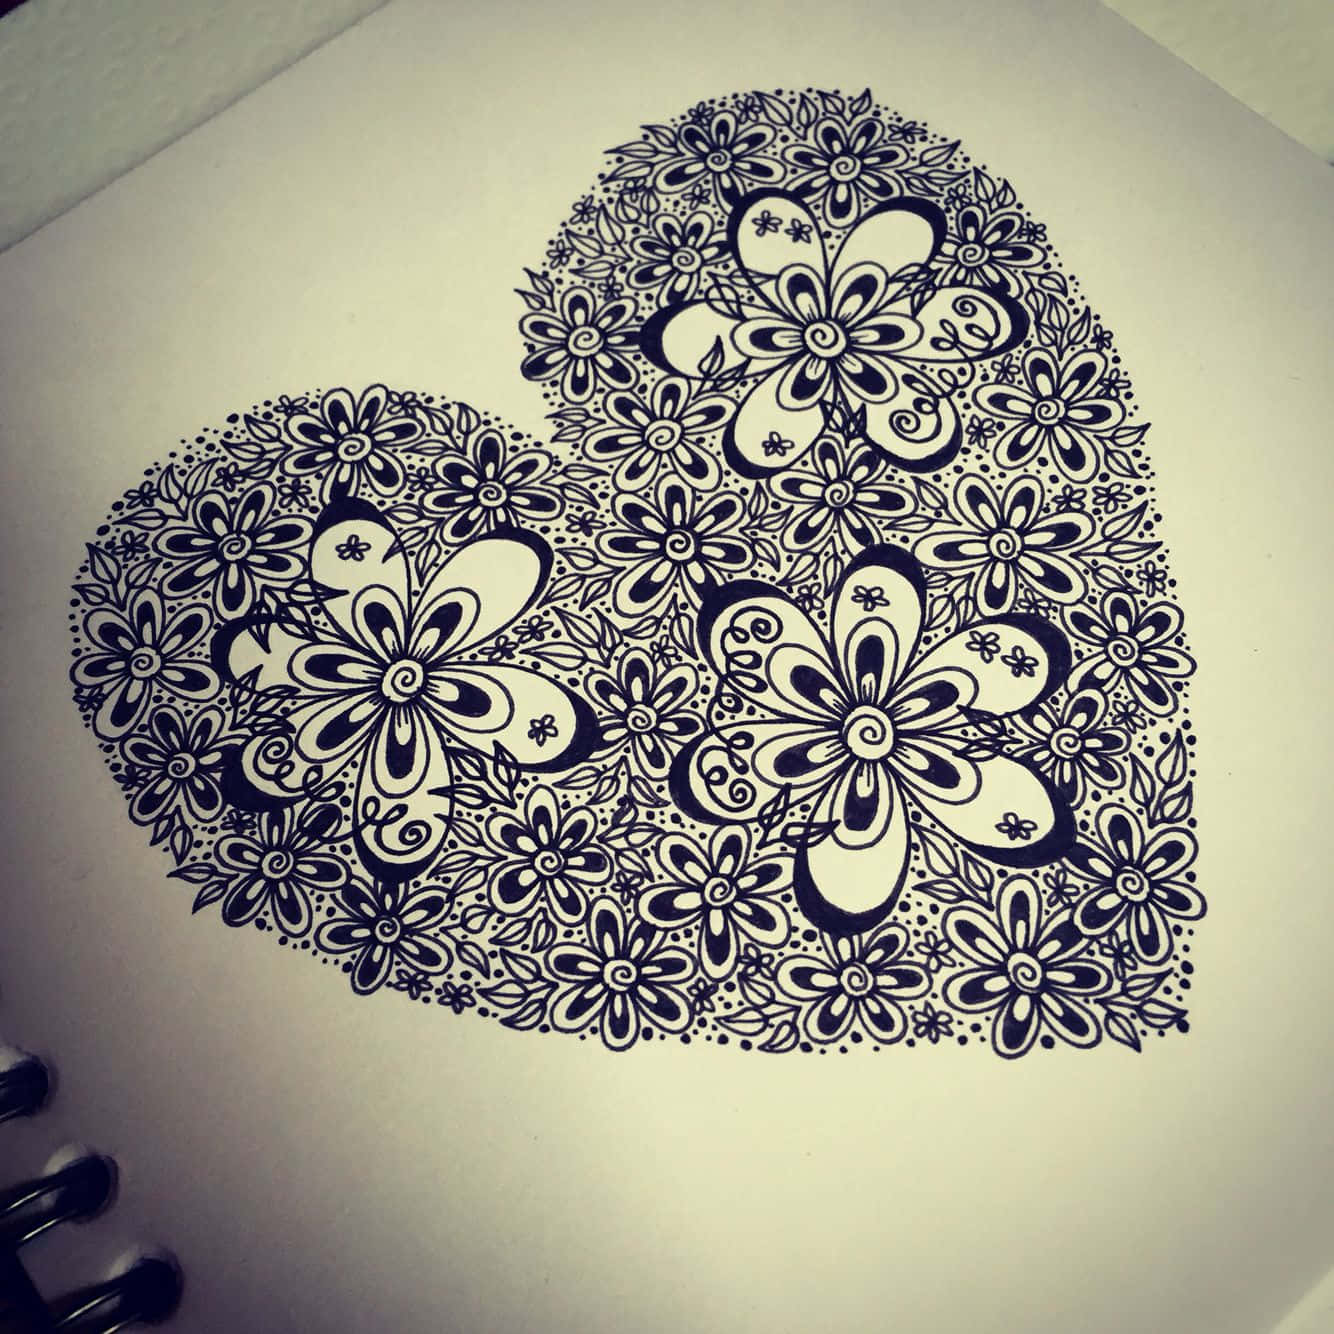 Expressive Heart Doodle on a Crumpled Page Wallpaper